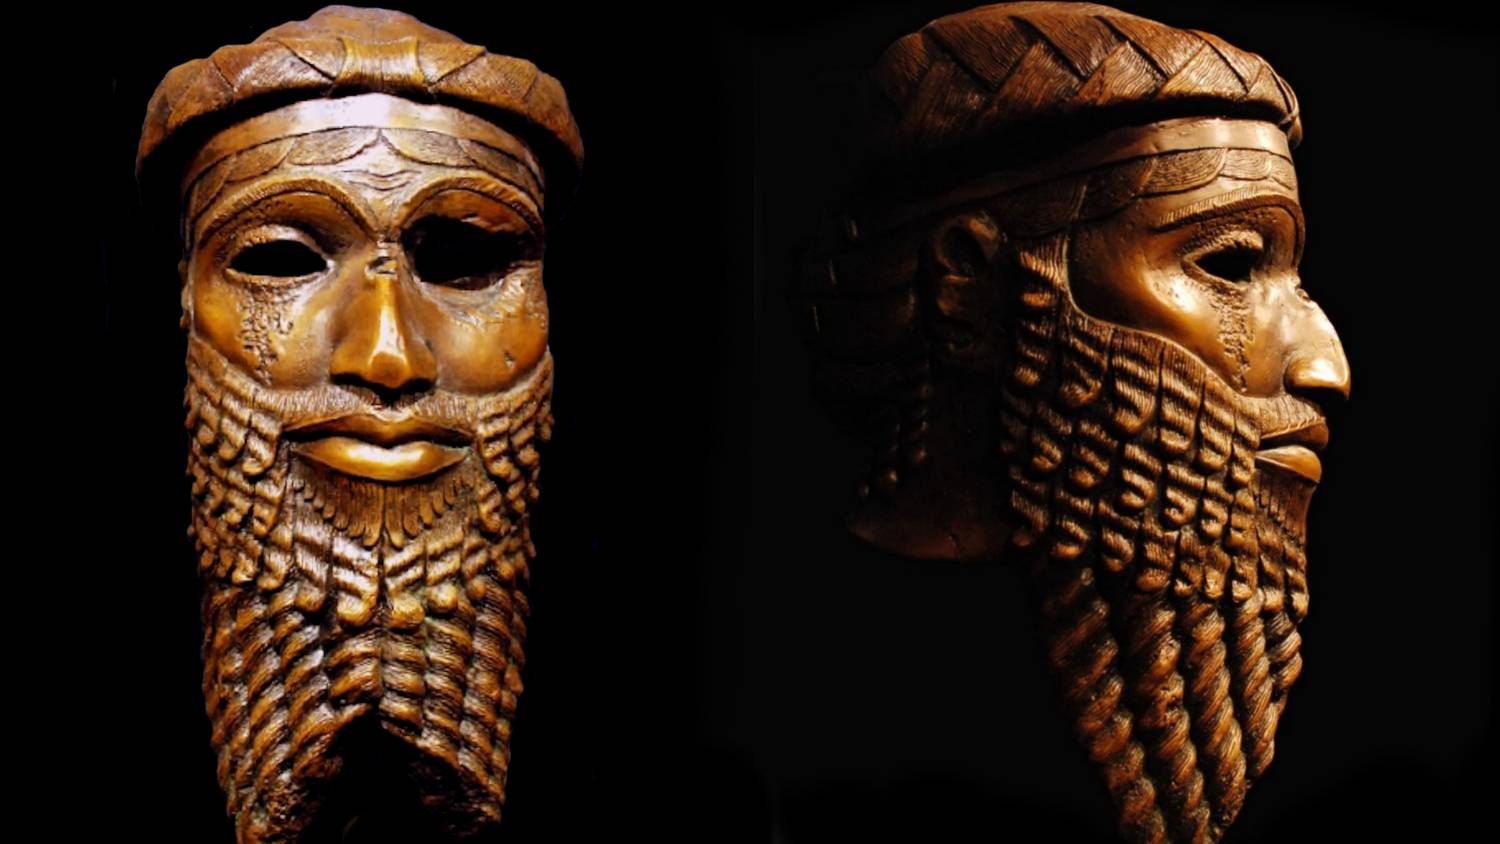 The mask of Sargon of Akkad, the first ruler of the Akkadian Empire, was once on display at The British Museum (Wikipedia)